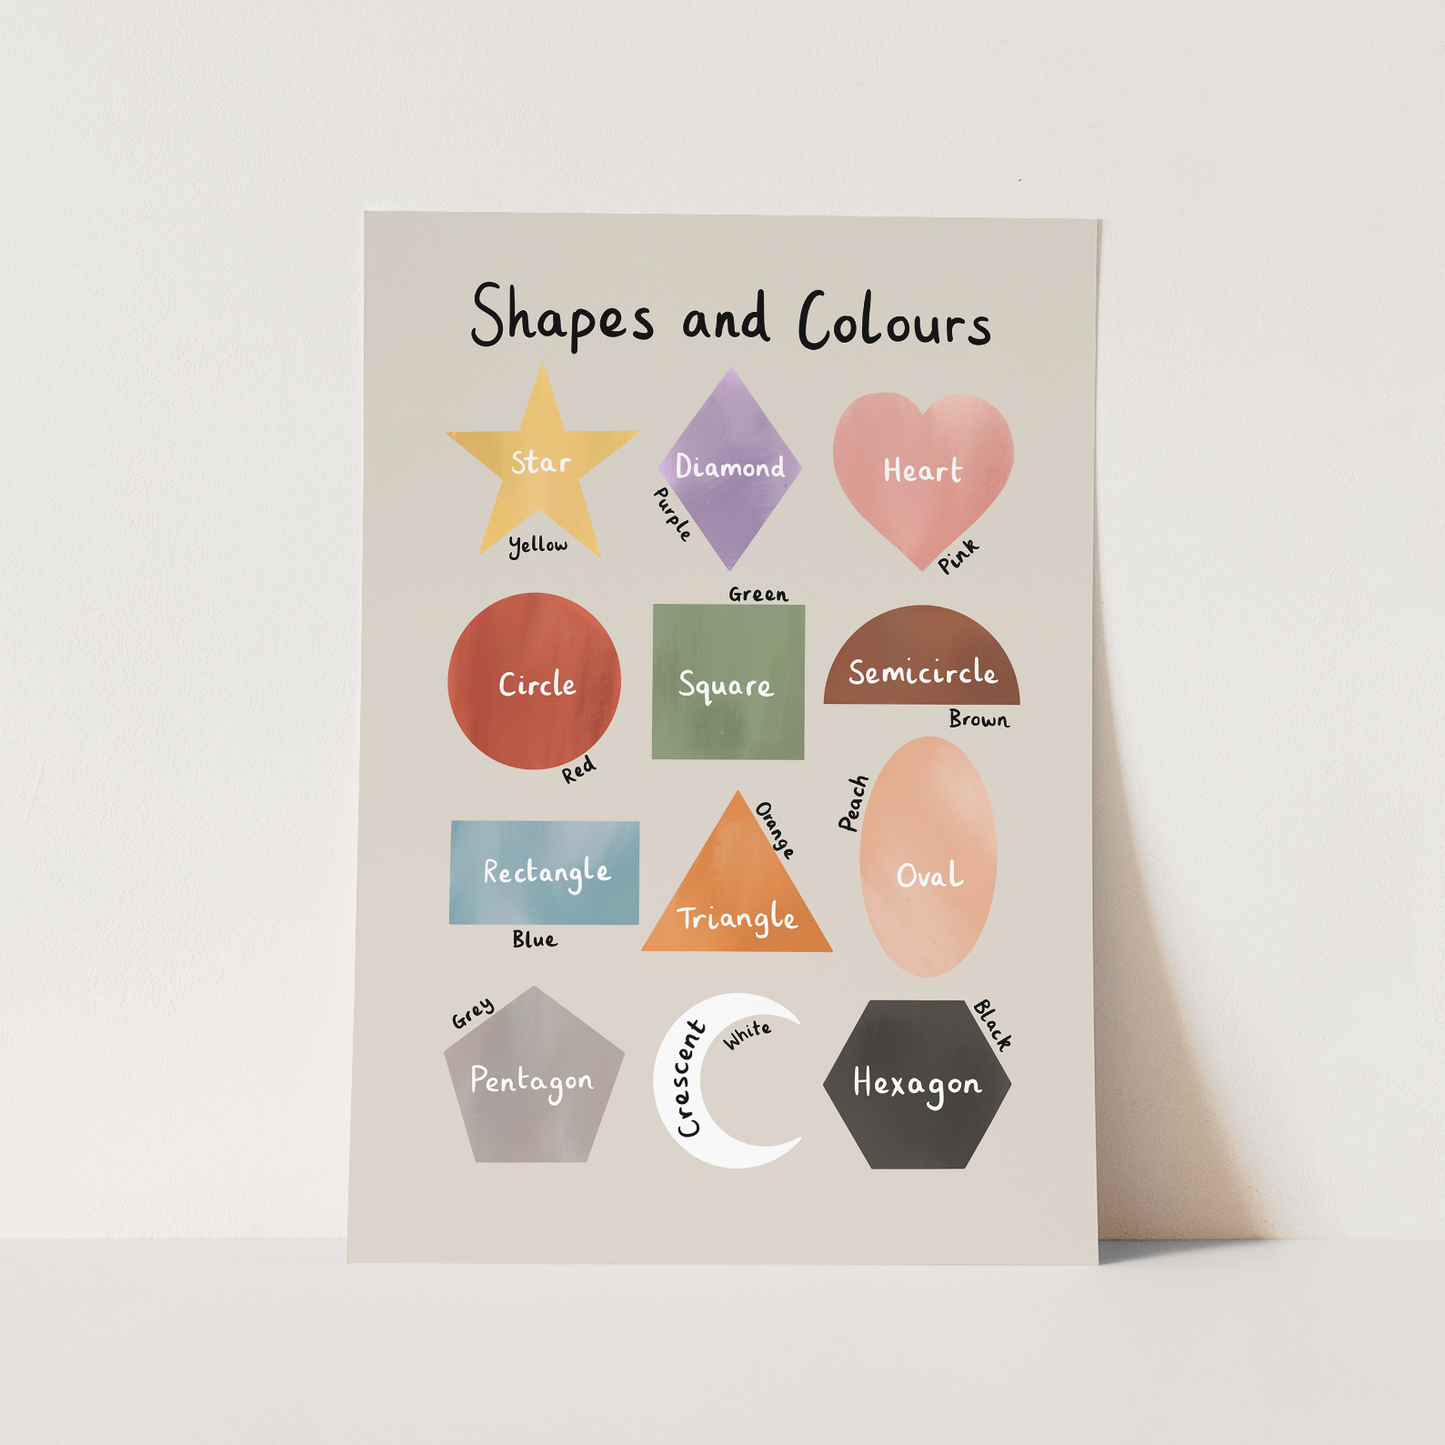 Shapes and Colours in stone / Fine Art Print